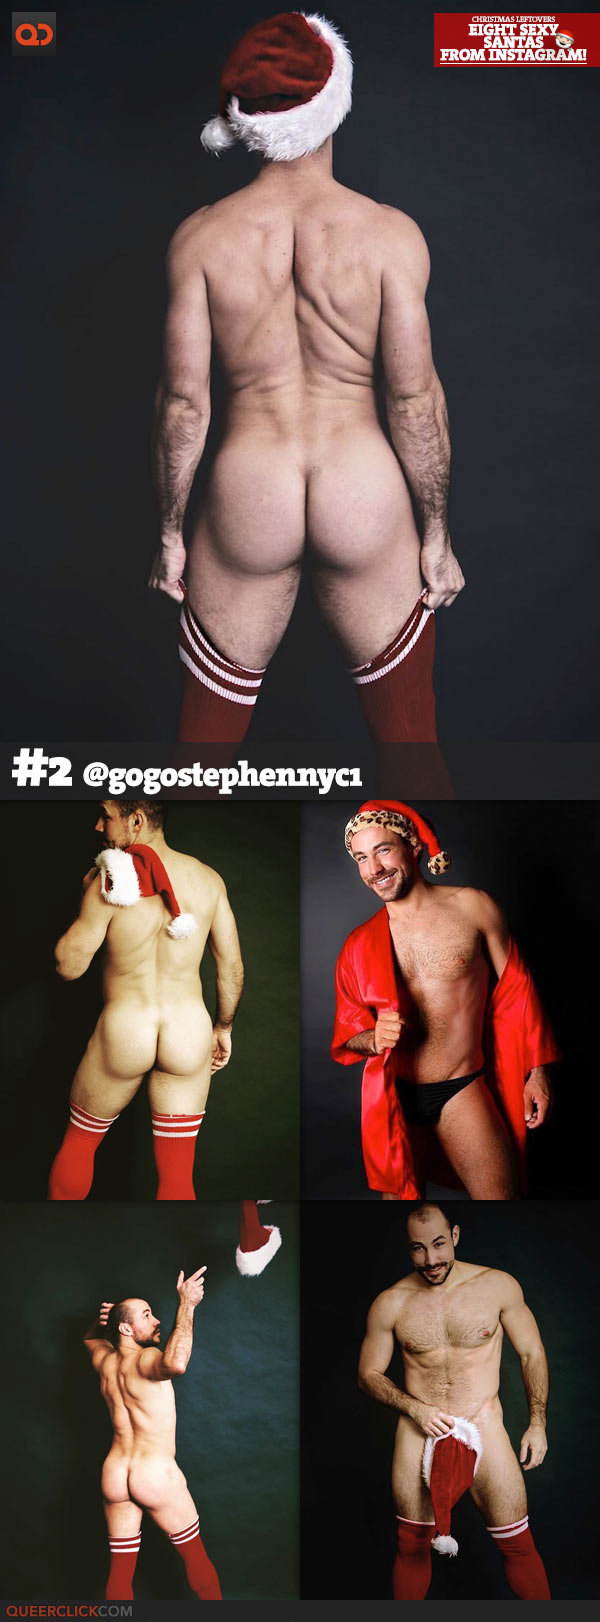 Christmas Leftovers: Eight Sexy Santas From Instagram!